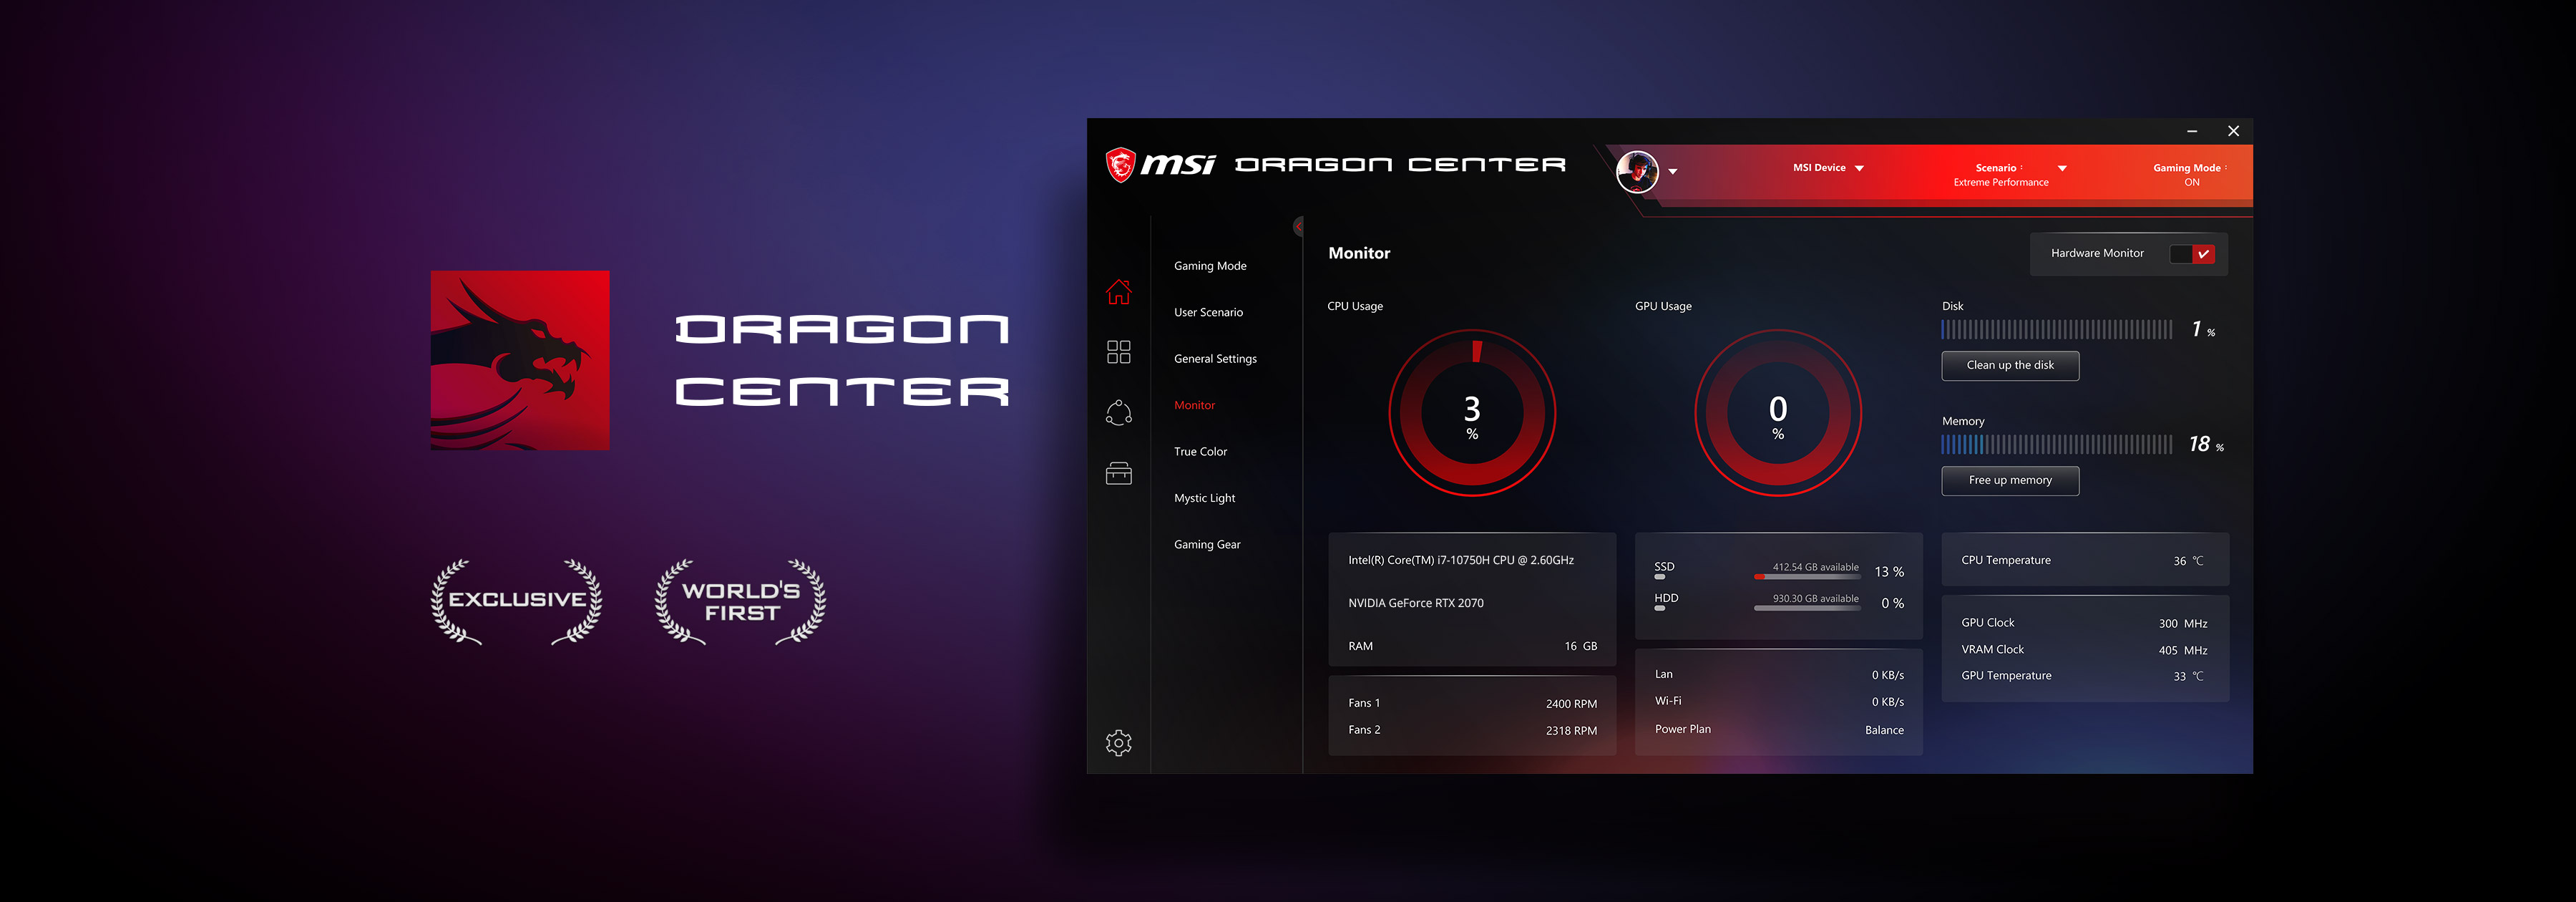 MSI Dragon Center: A versatile software that provides control and customization options for MSI gaming devices, serving as an alternative to ighub.exe.
EVGA Precision X1: A powerful software specifically designed for EVGA graphics cards, offering an alternative to ighub.exe with advanced overclocking and monitoring features.